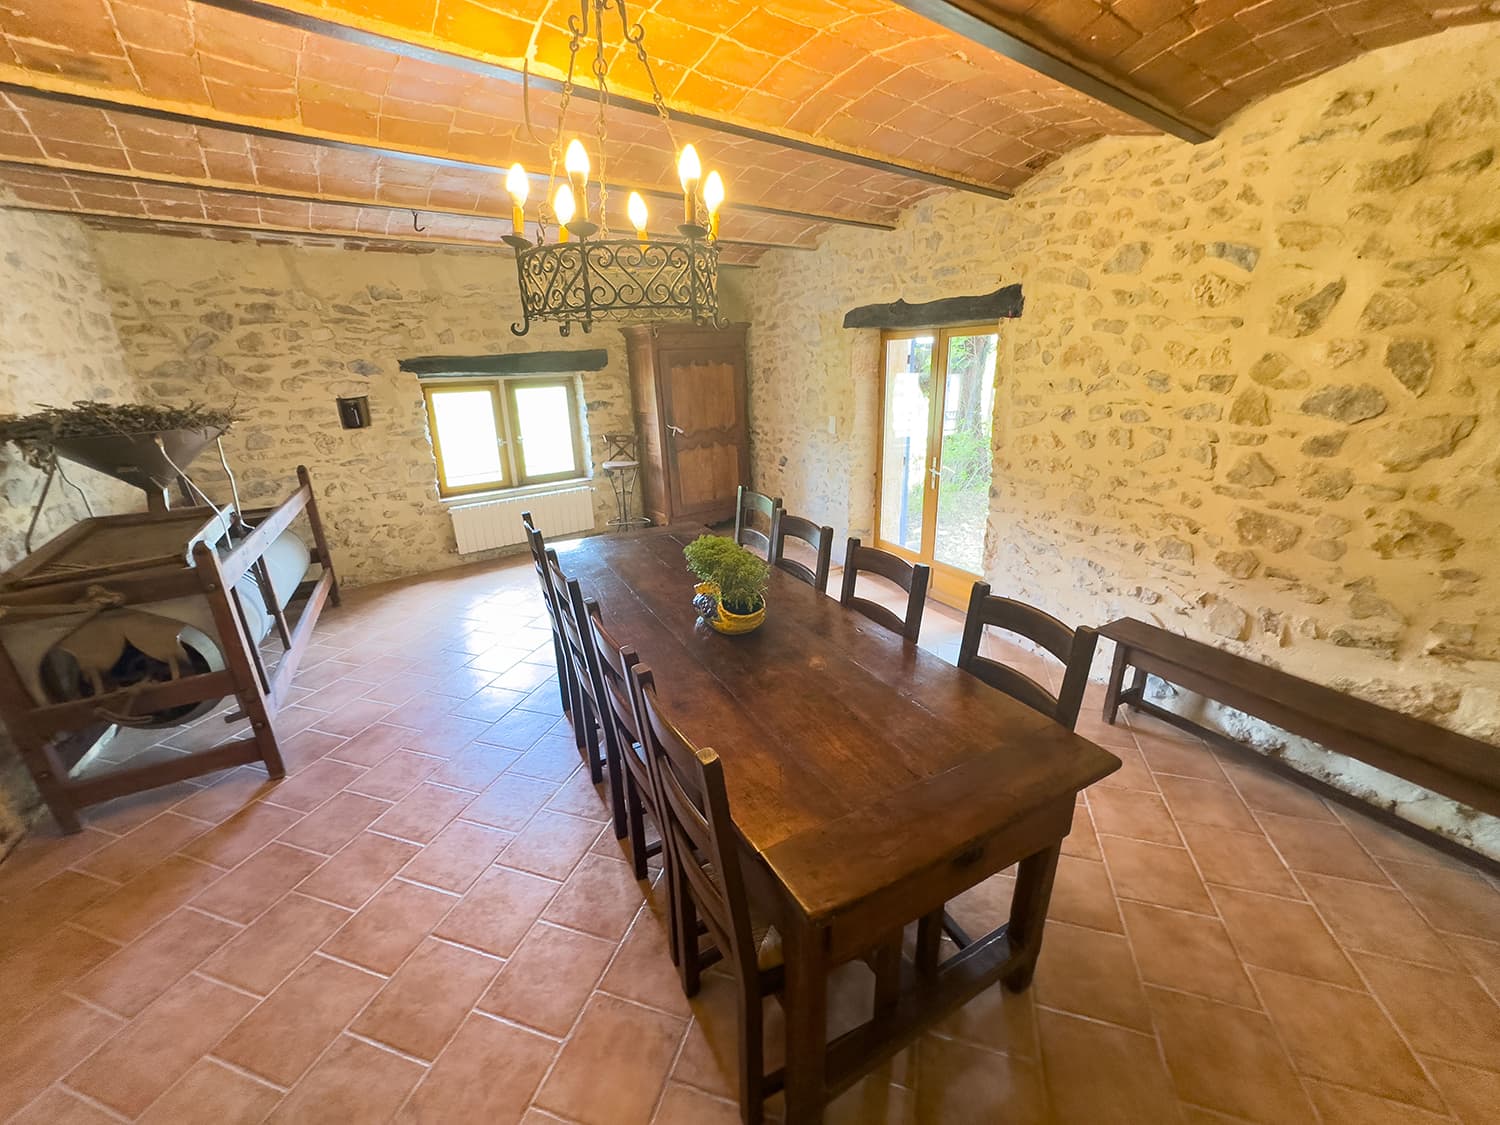 Dining room | Holiday home in Gard, South of France